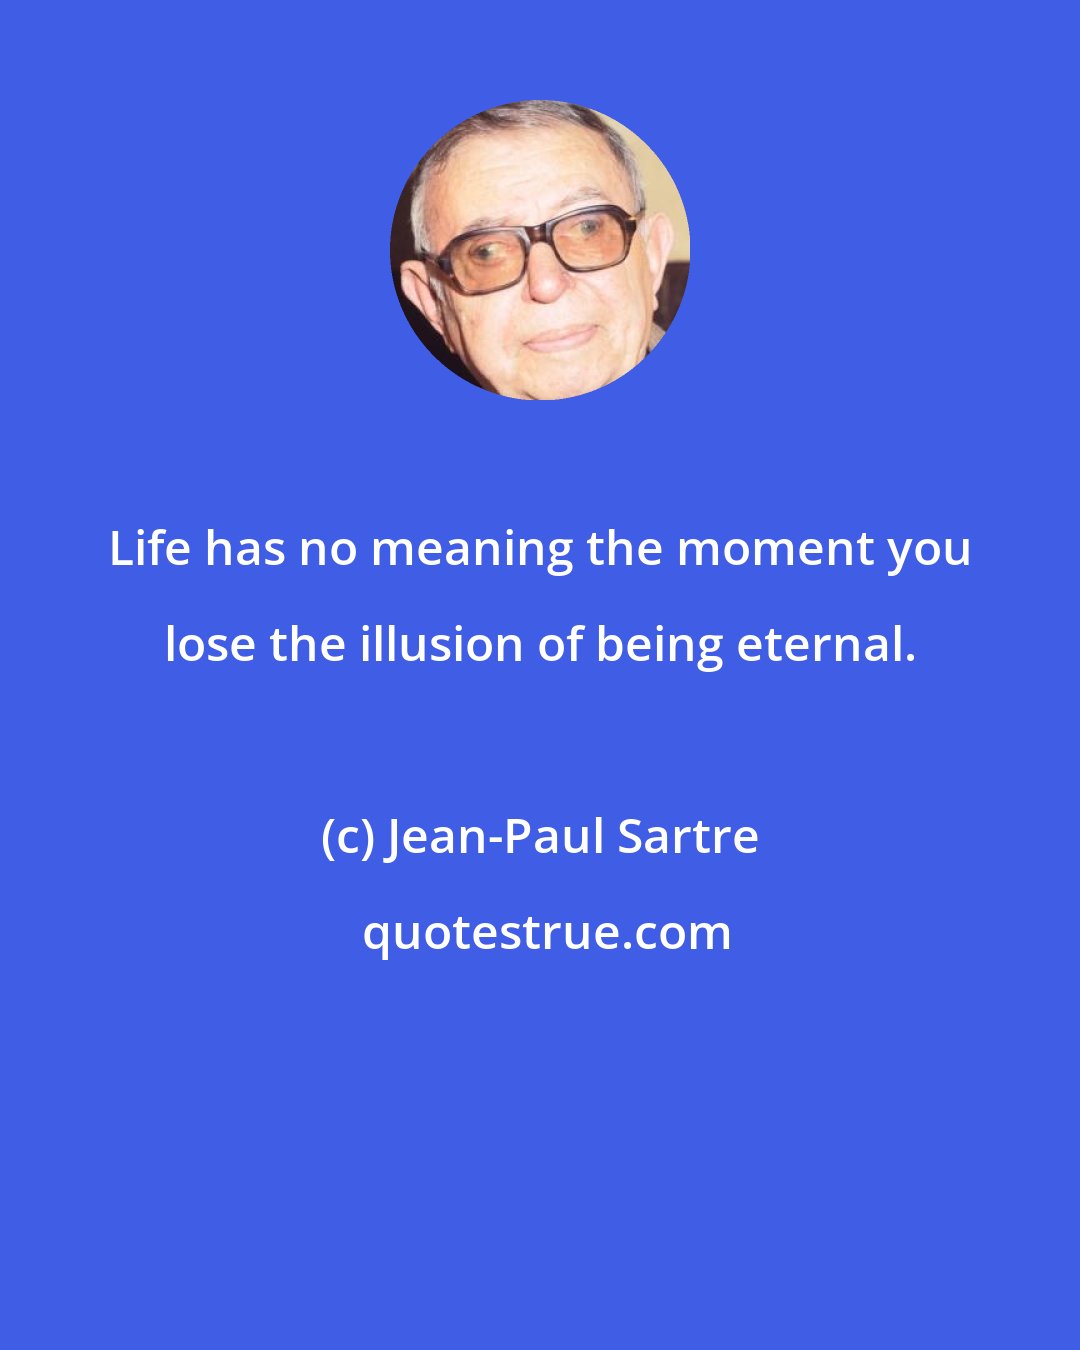 Jean-Paul Sartre: Life has no meaning the moment you lose the illusion of being eternal.